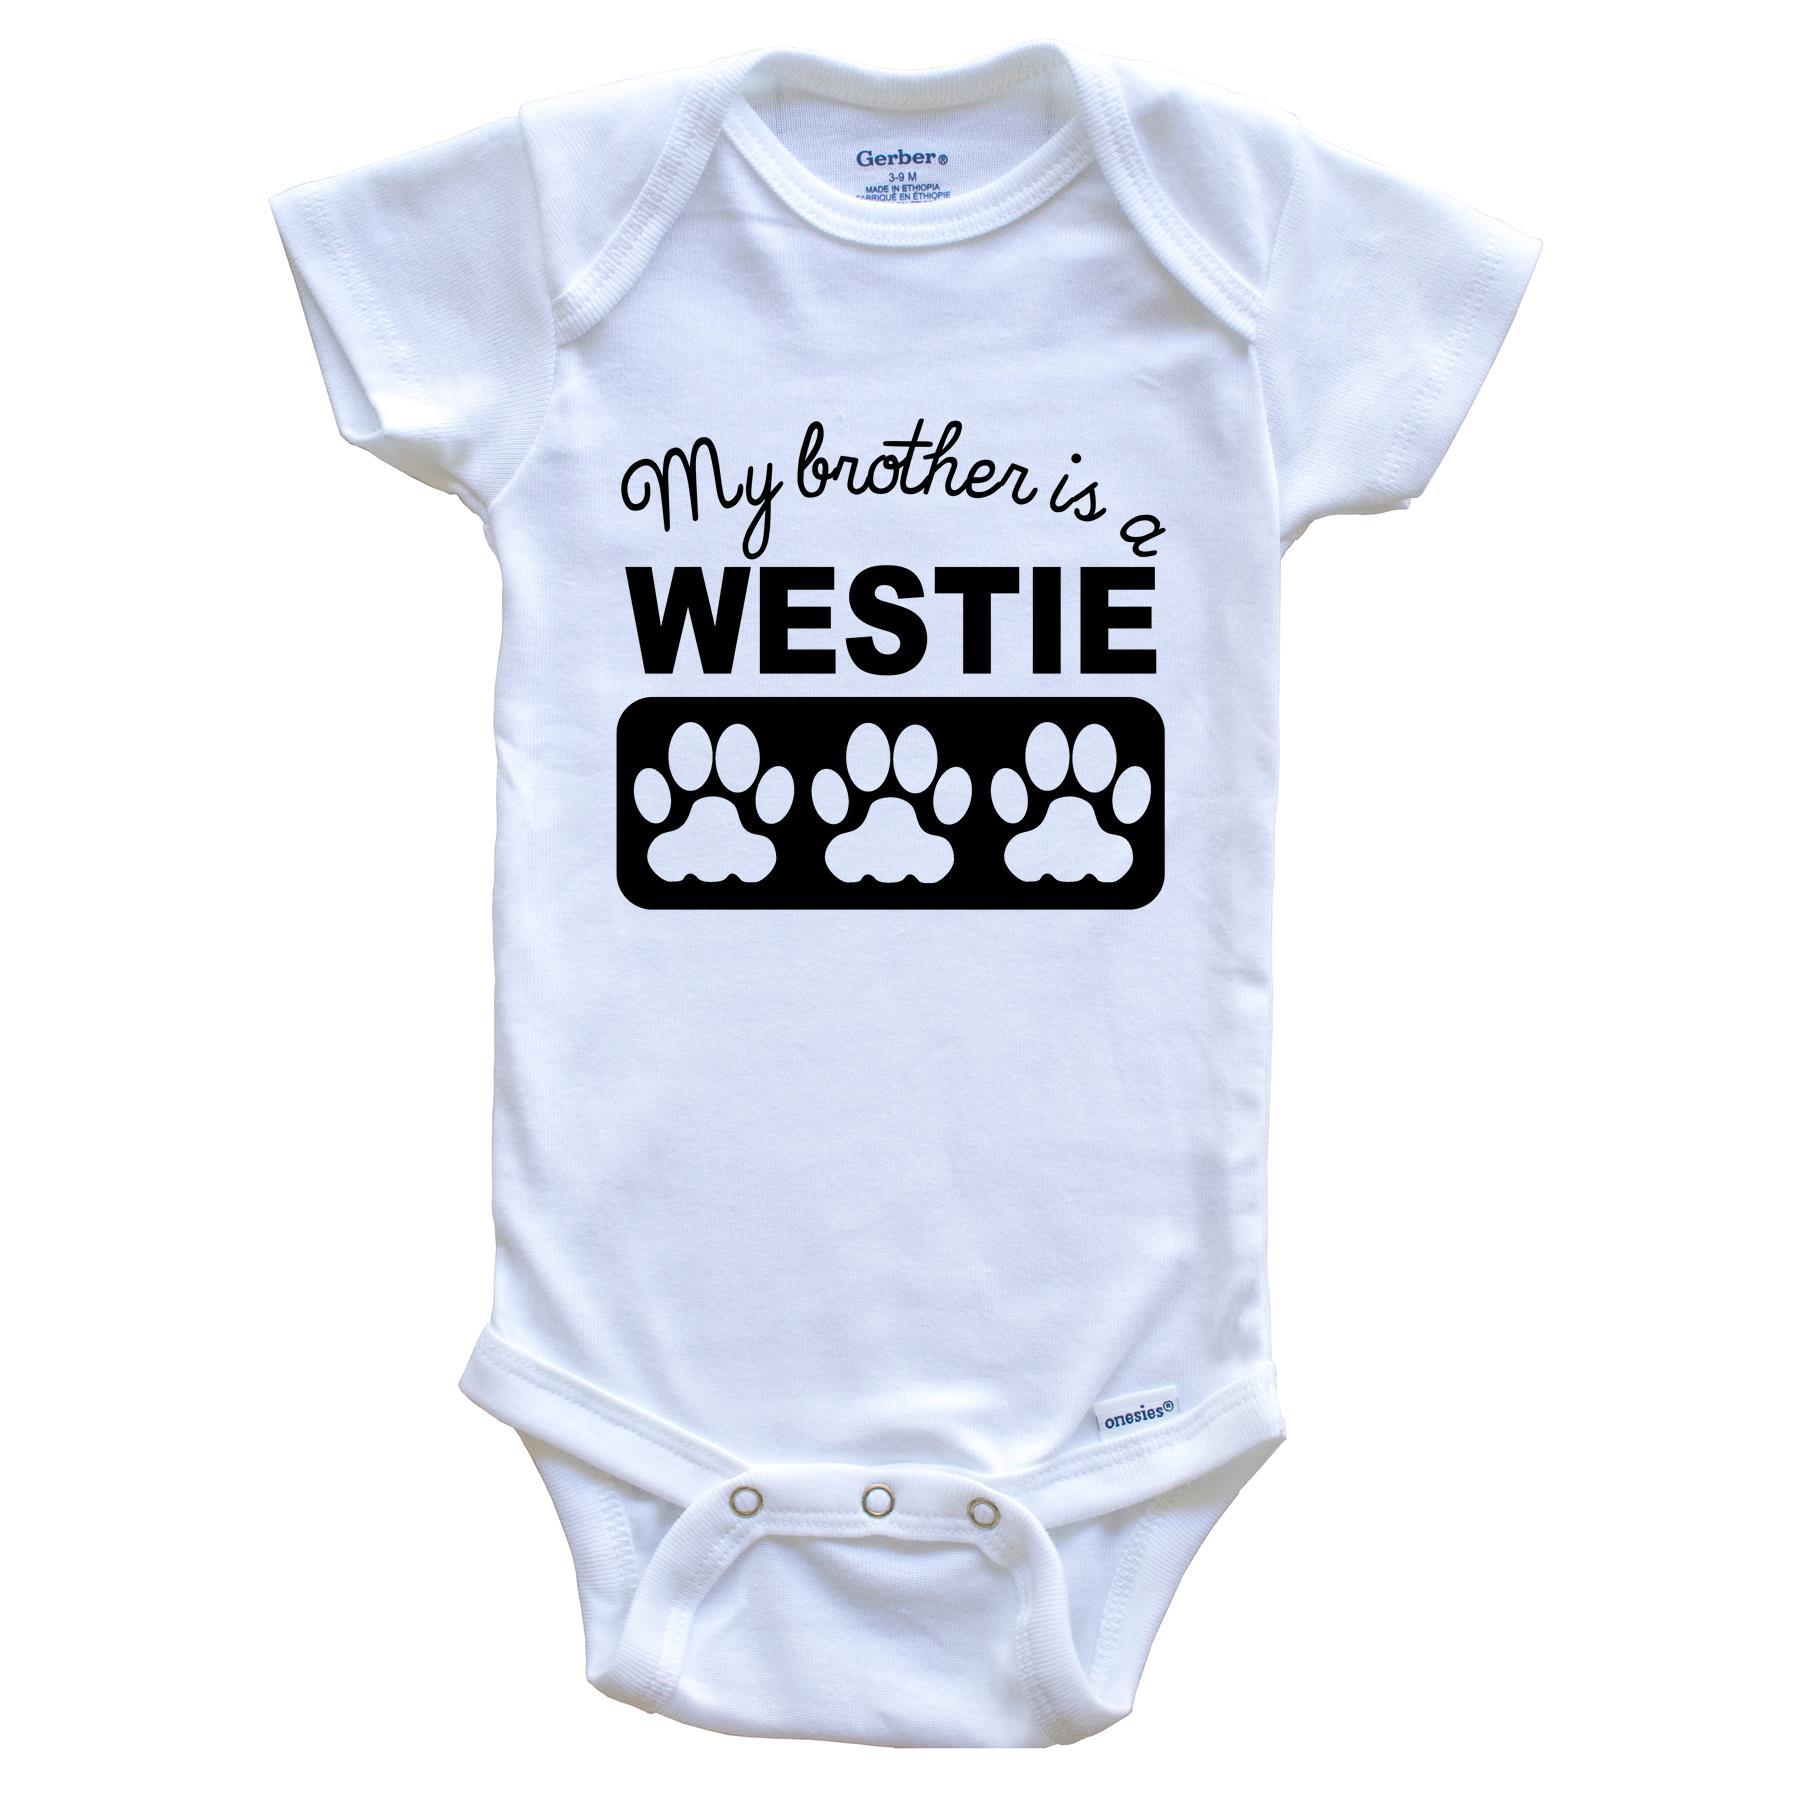 My Brother Is A Westie Baby Onesie